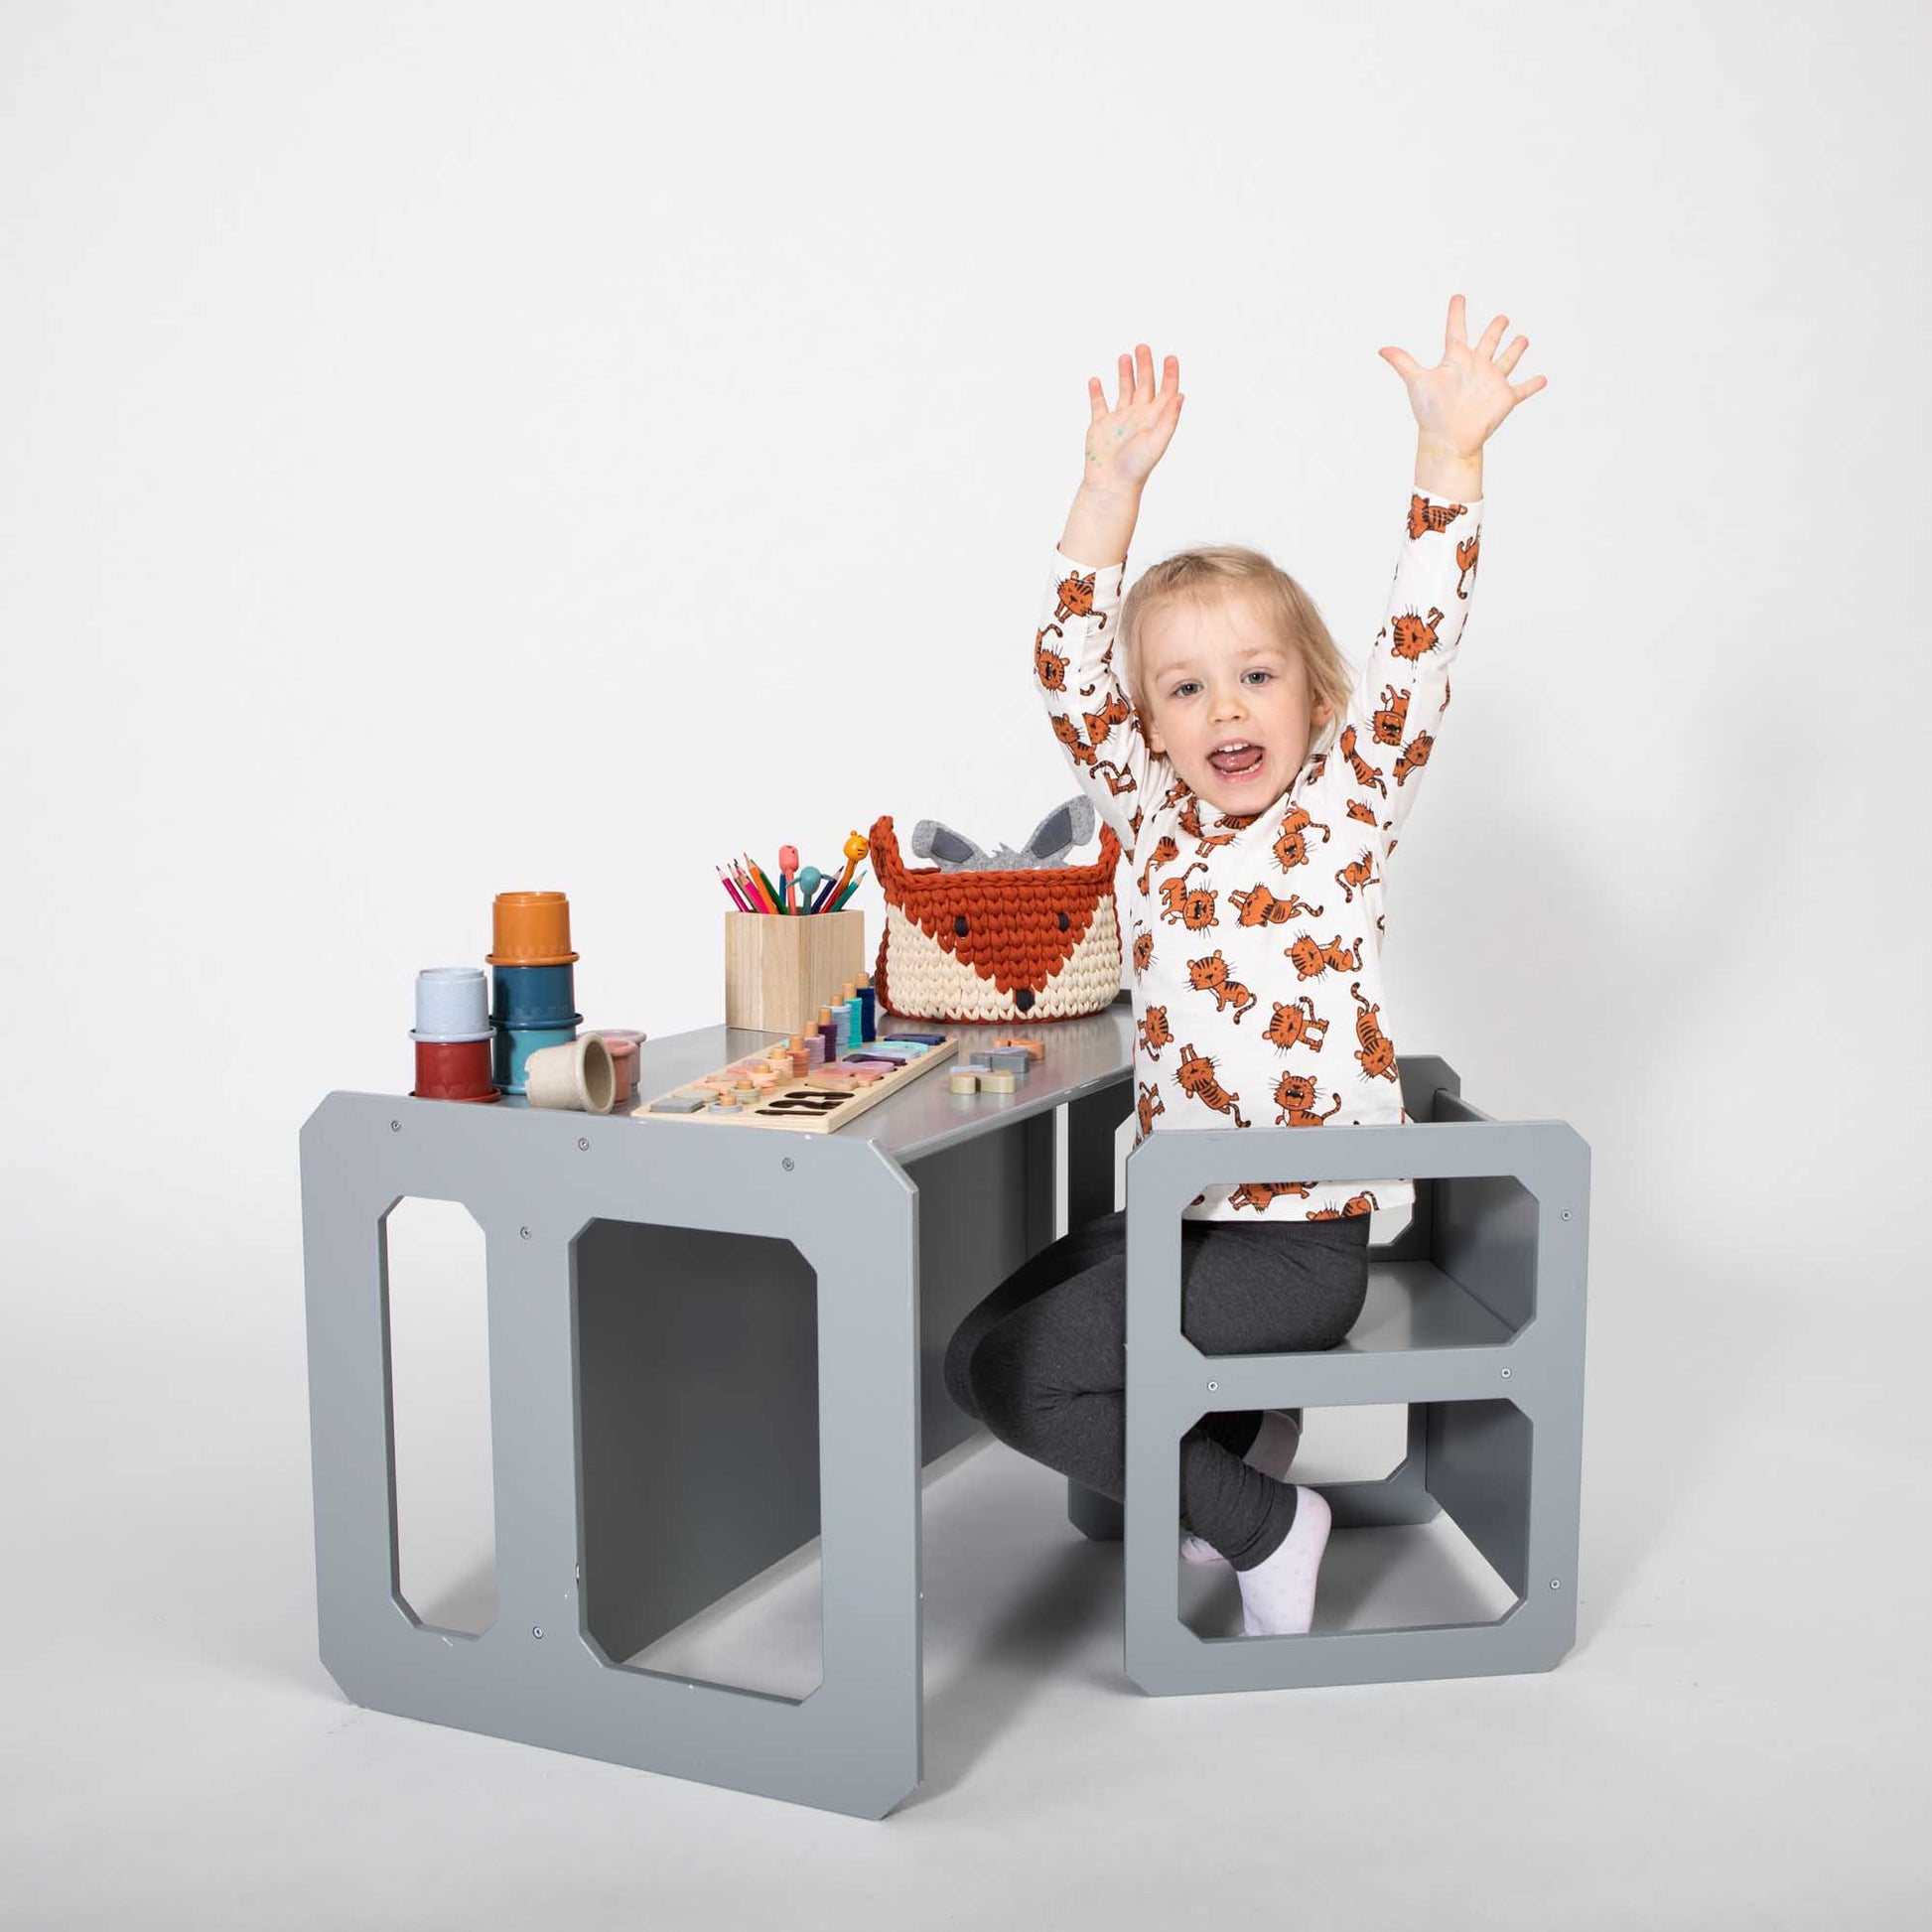 A young child sitting on a Sweet Home From Wood Montessori weaning table and chair set.